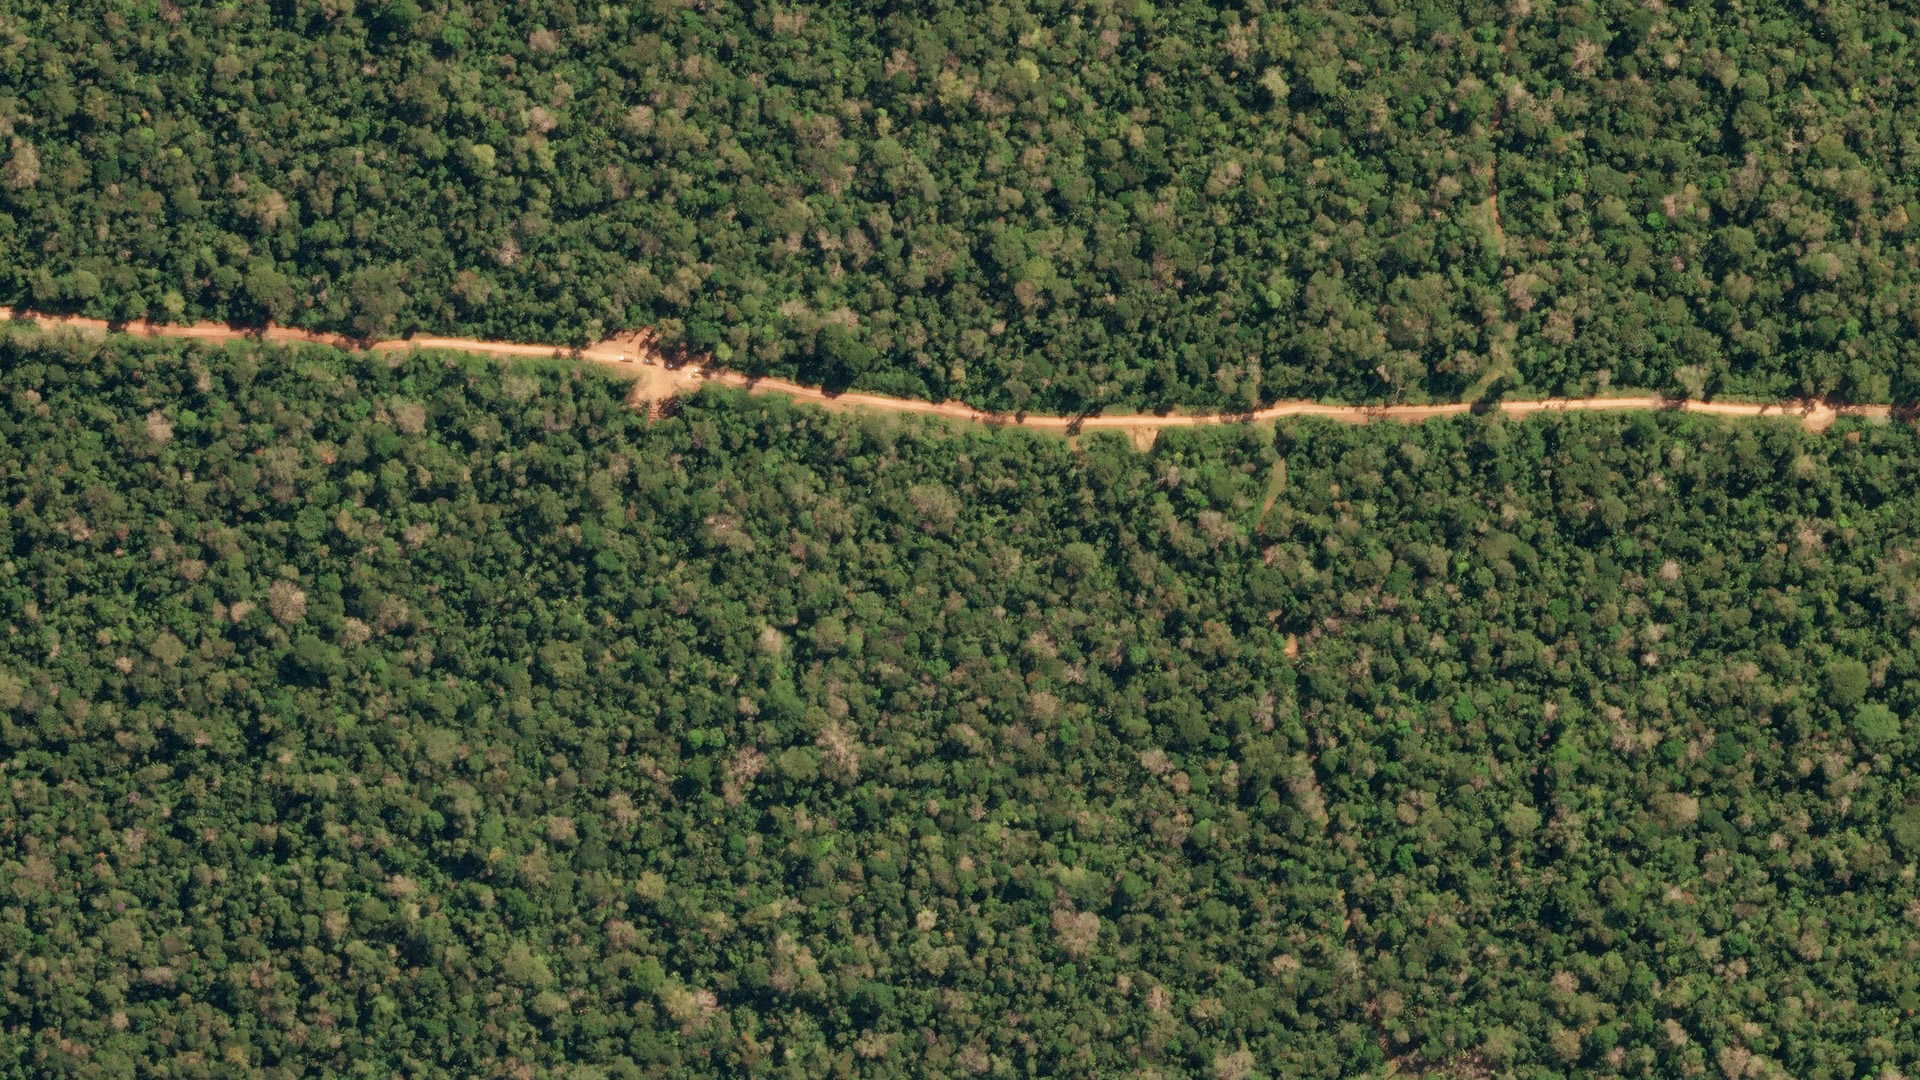 Aerial shot of a road stretching through a forested area.